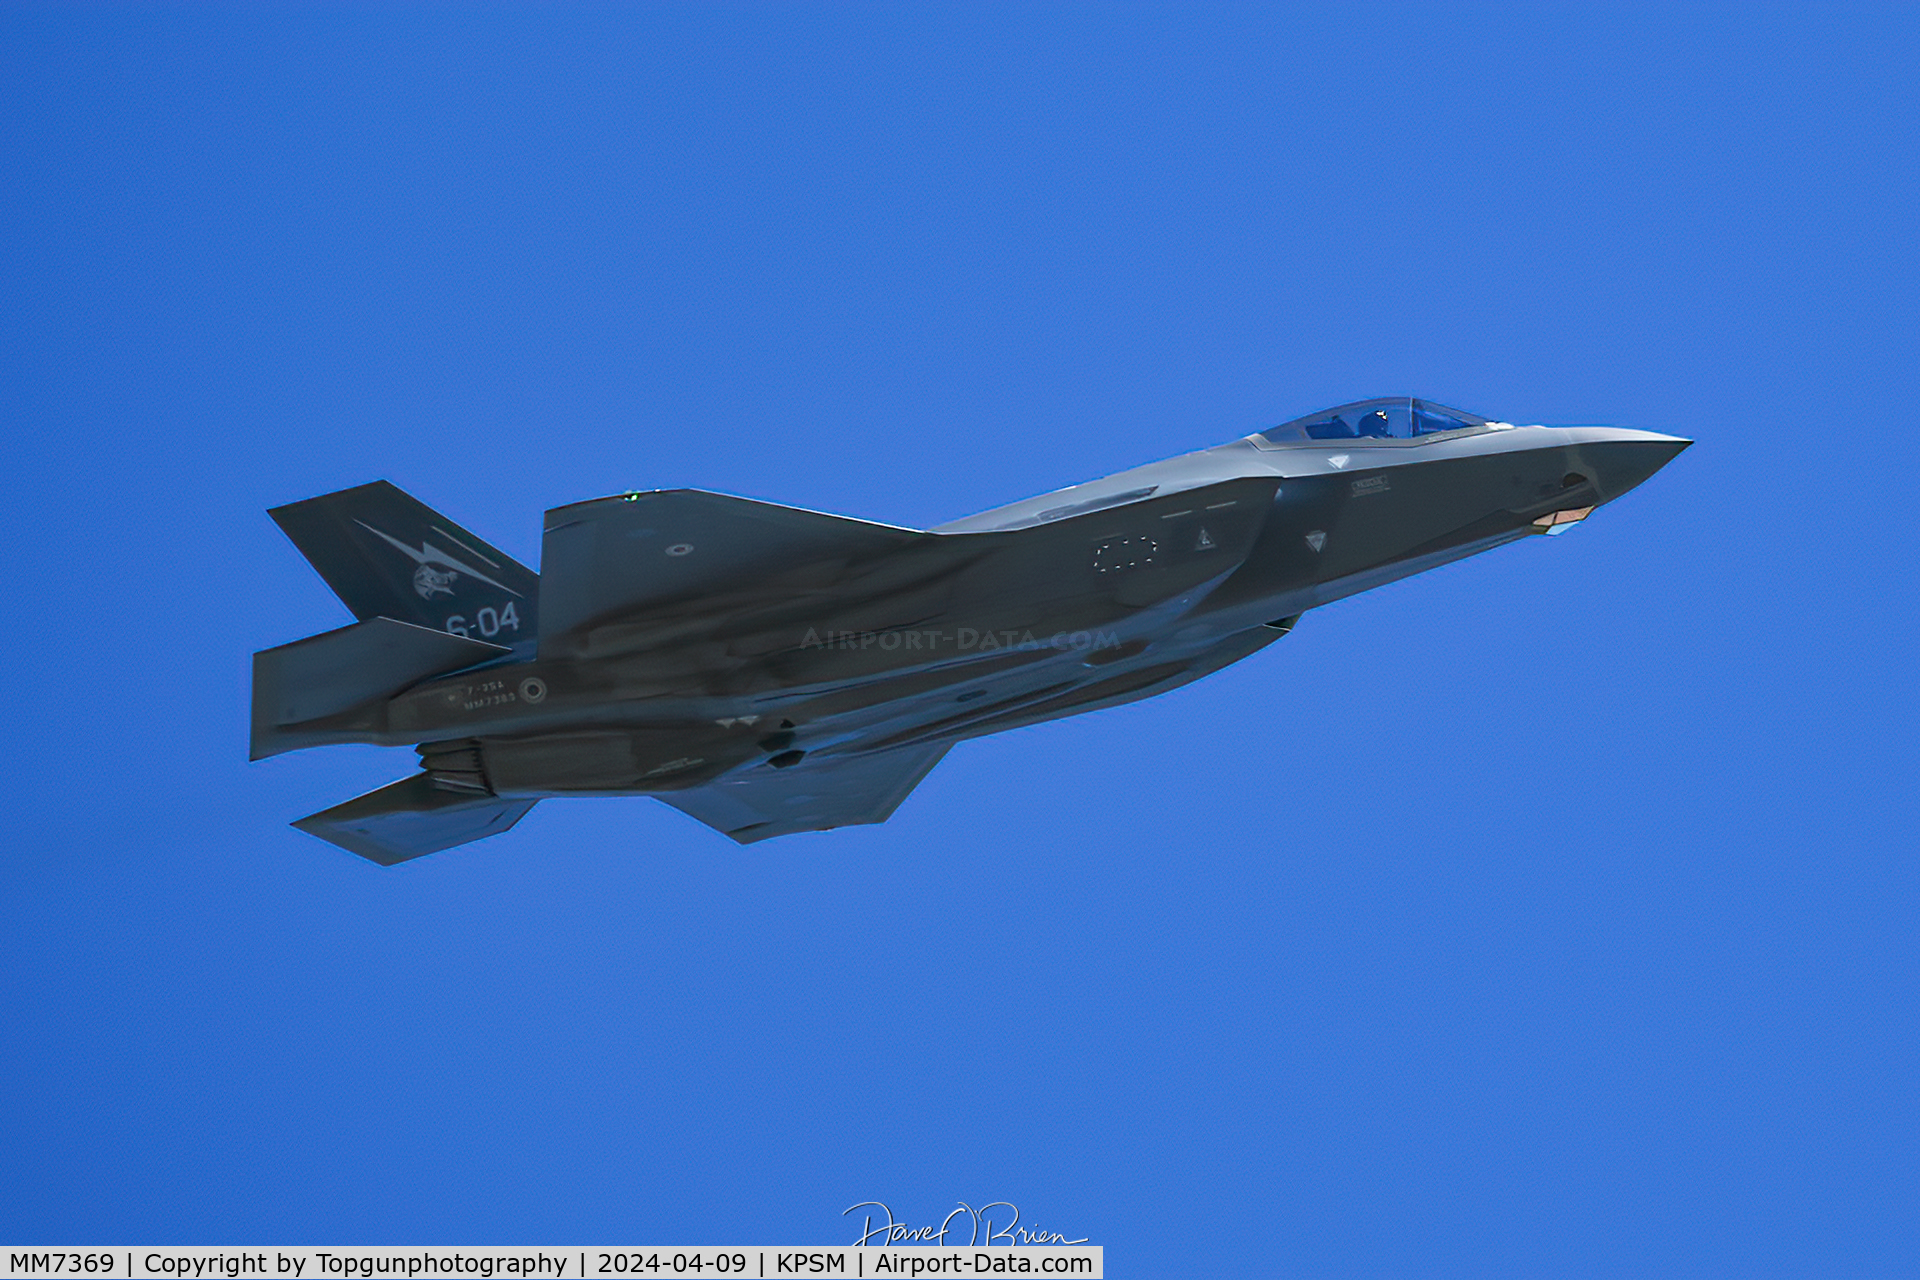 MM7369, Lockheed Martin F-35A Lightning II C/N AL-19, IAM0603 closes out the 1st group's departure